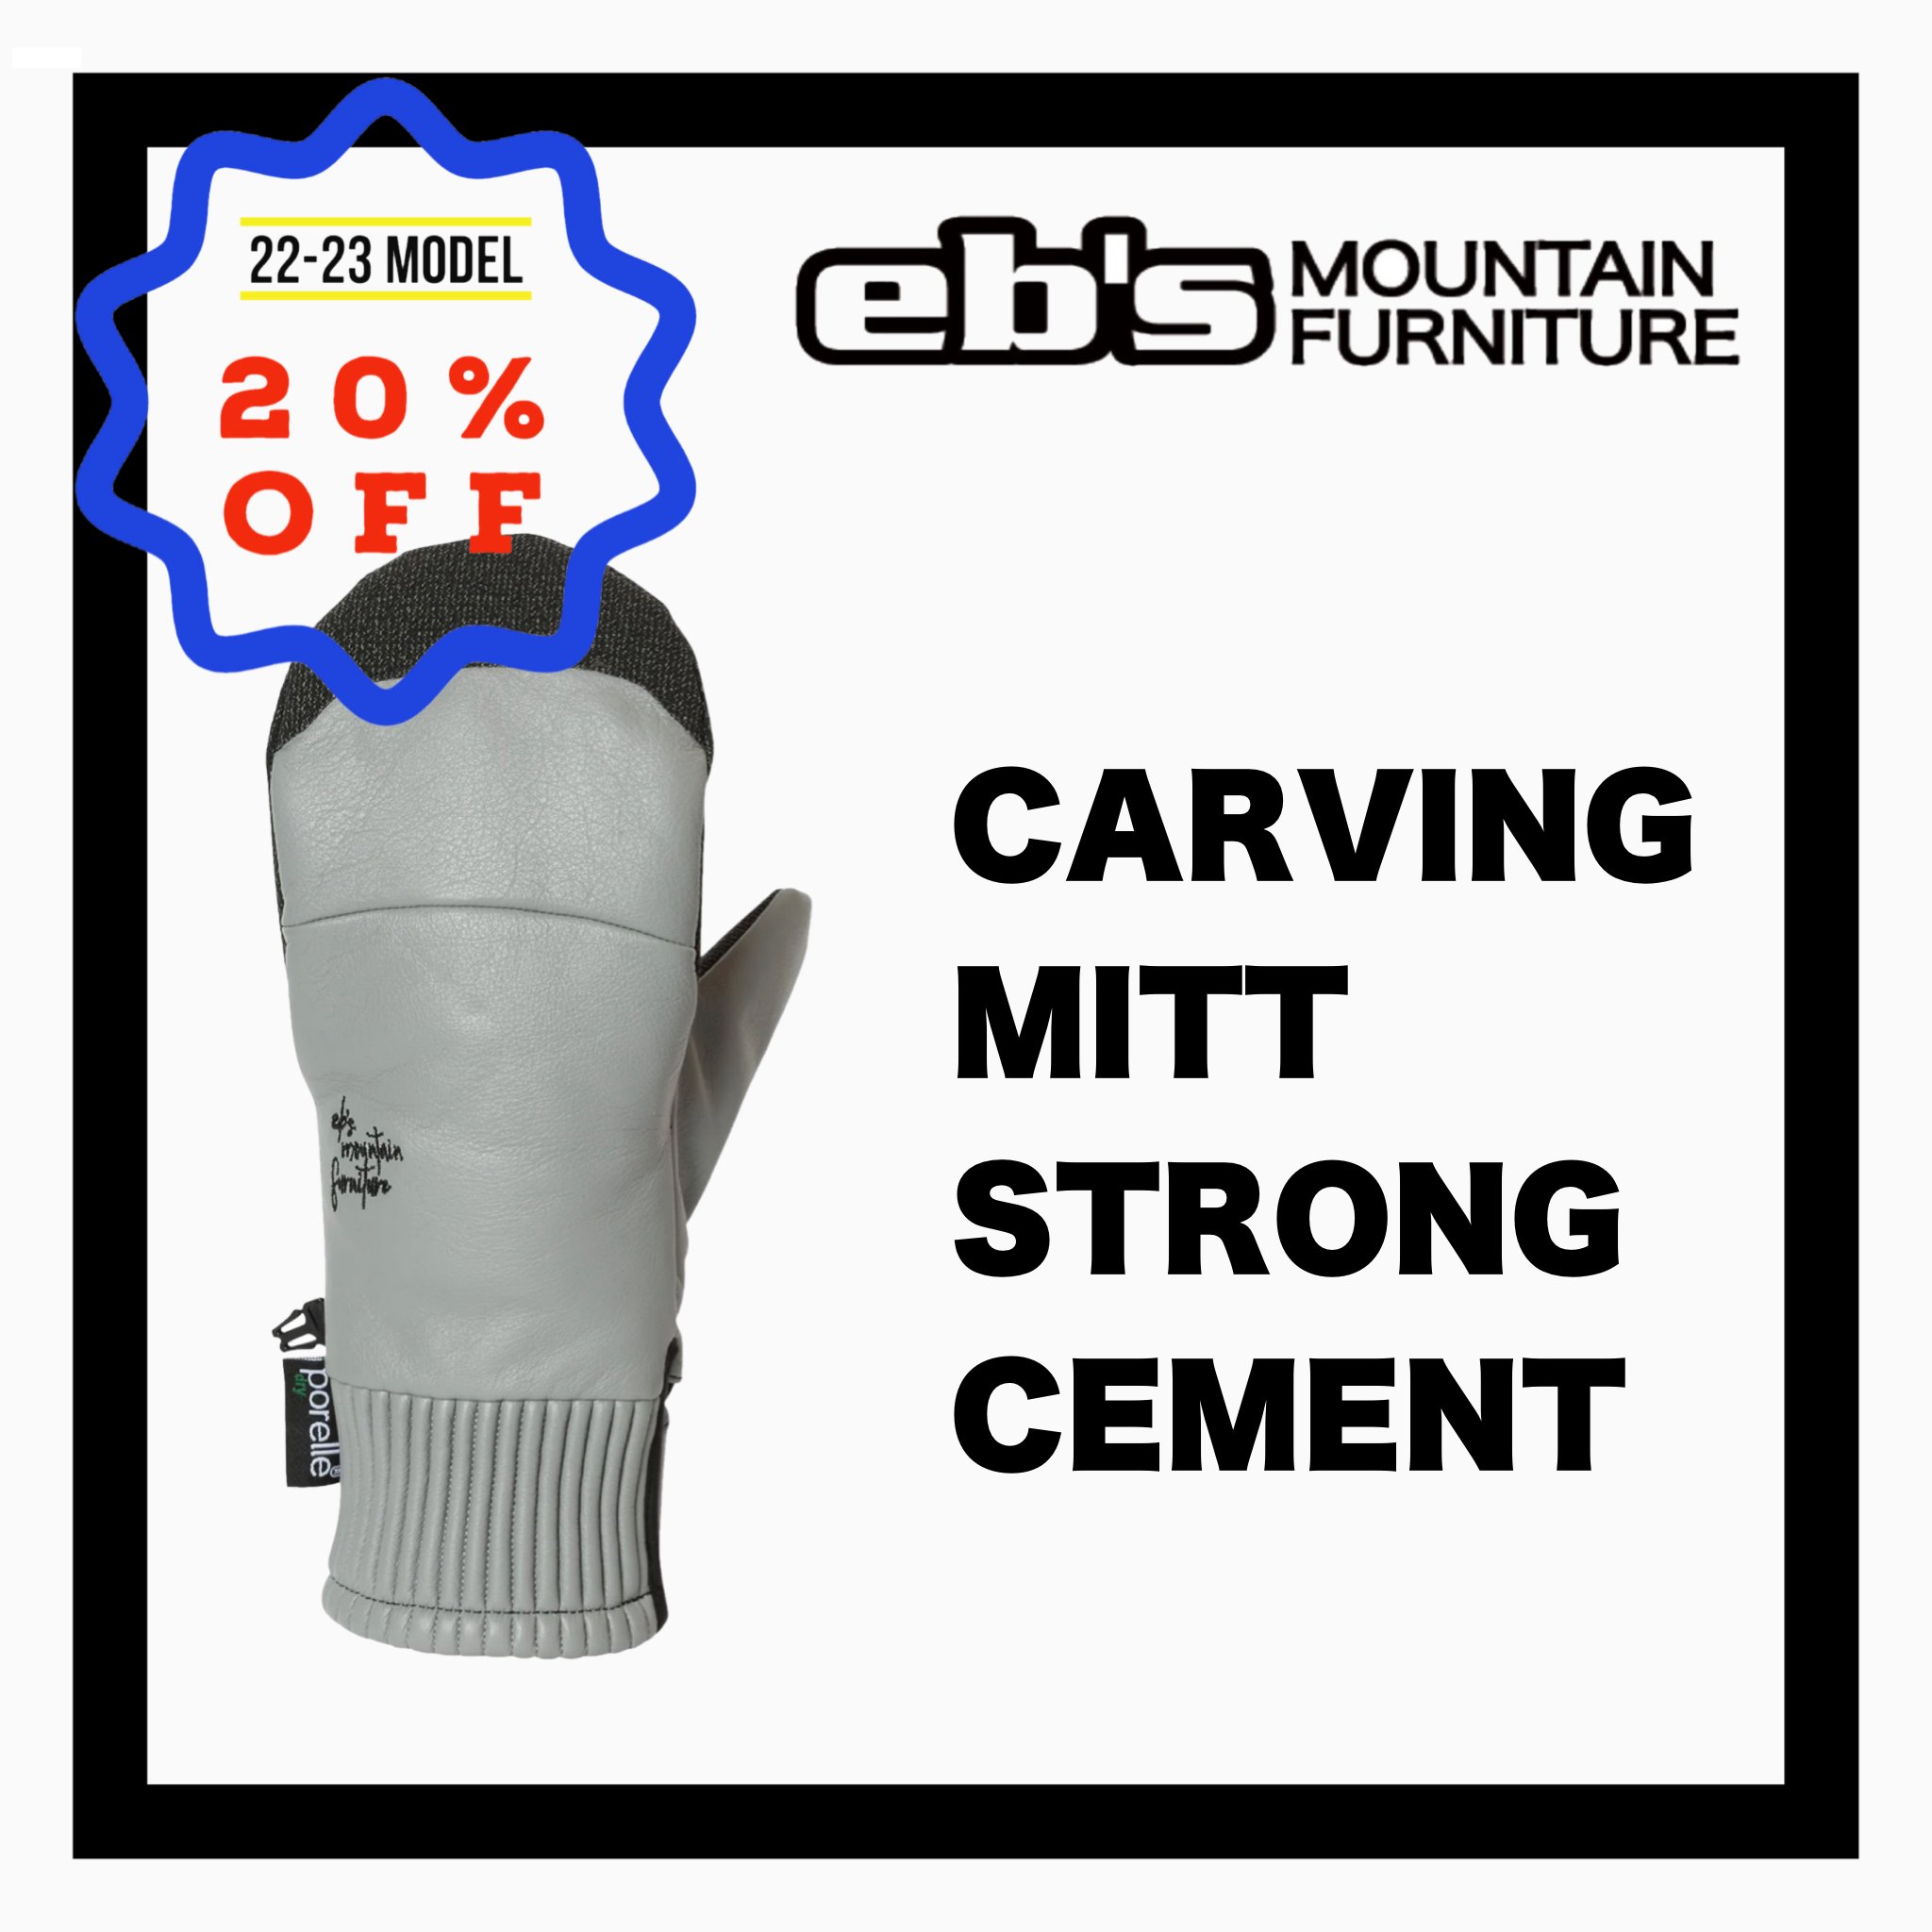 eb'sCARVING MITT / STRONG CEMENT